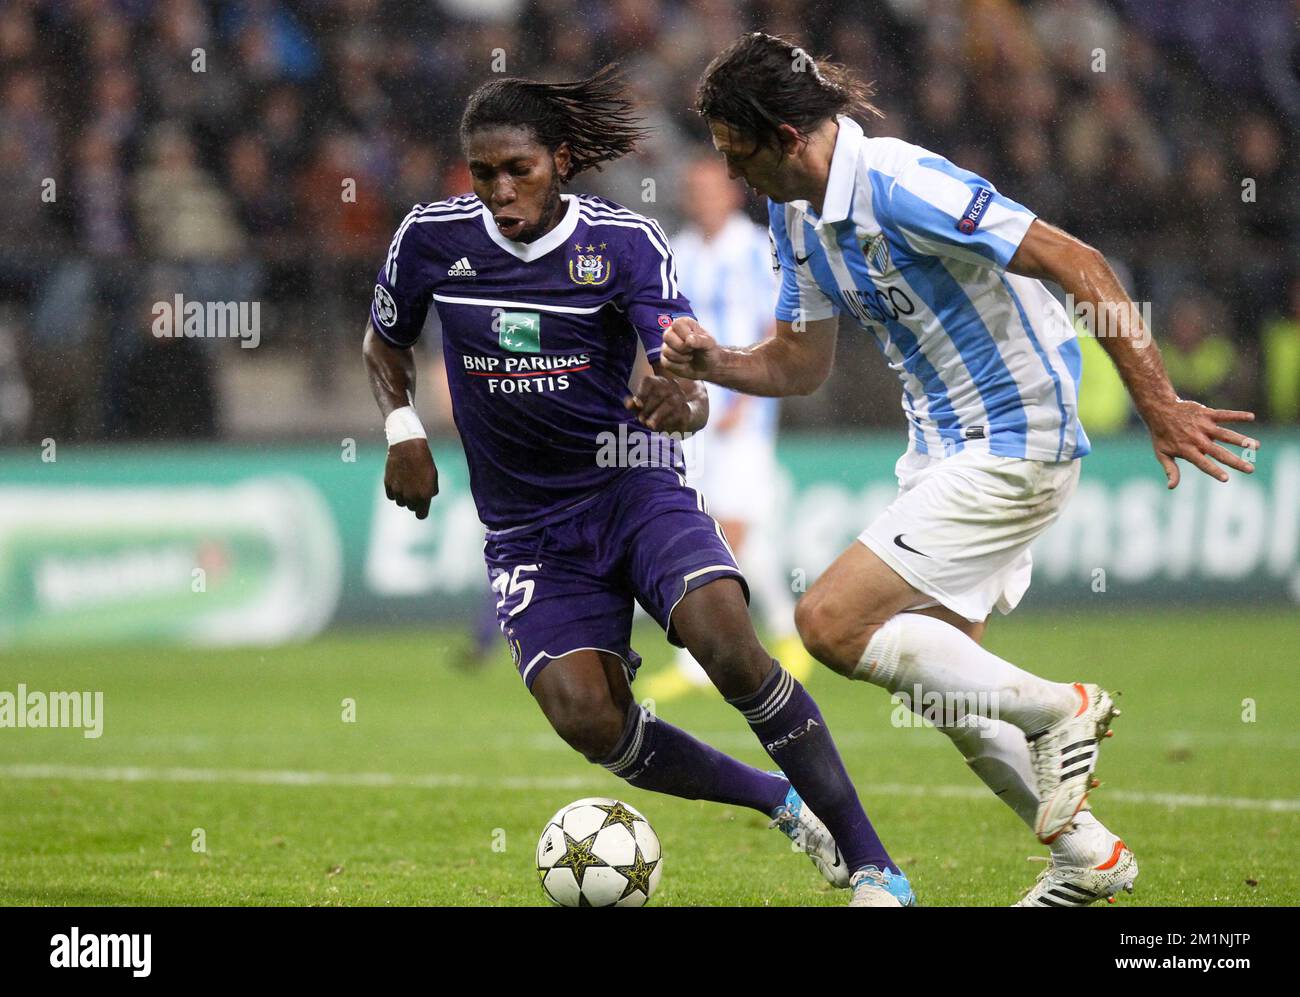 20121003 - BRUSSELS, BELGIUM: Anderlecht's Dieumerci Mbokani and Malaga's defender Martin Demichelis fight for the ball during the match between RSCA Anderlecht and Spanish club Malaga CF, on the second day of the group stage (group C) of the UEFA Champions League tournament, in Brussels, Wednesday 03 October 2012. BELGA PHOTO VIRGINIE LEFOUR Stock Photo